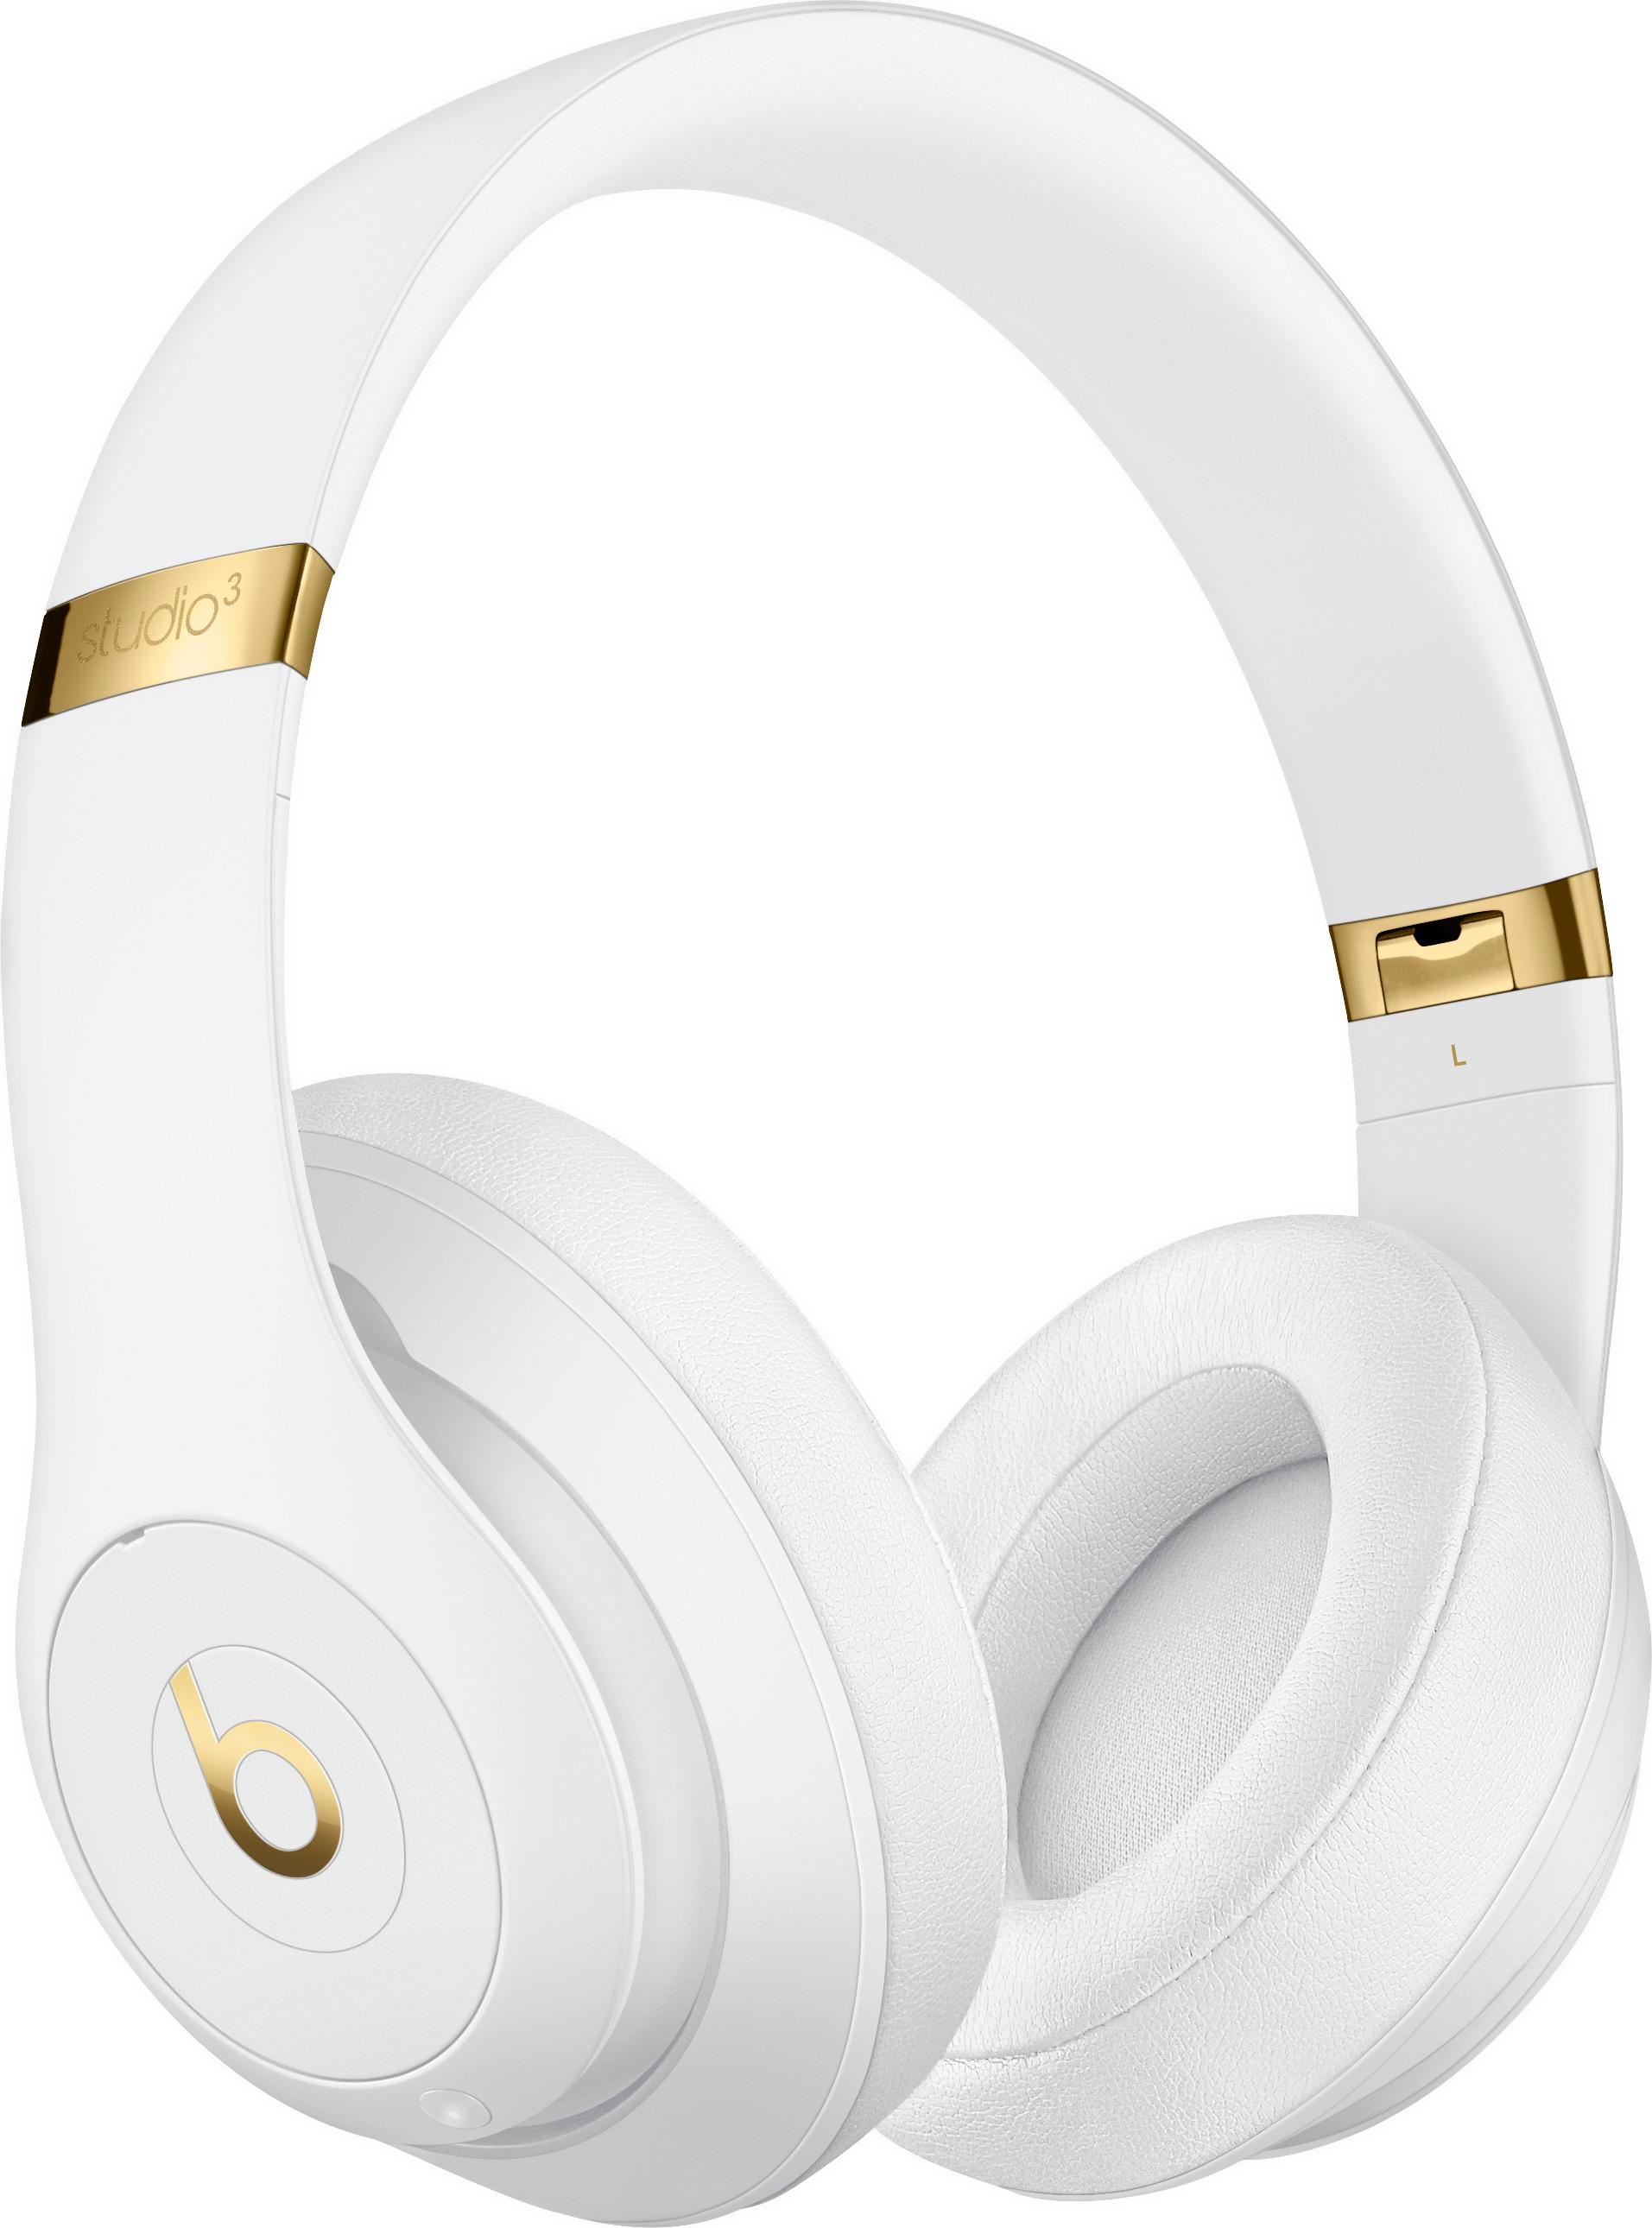 Beats by Dr. Dre - Beats Studio³ Wireless Noise Cancelling Headphones - White